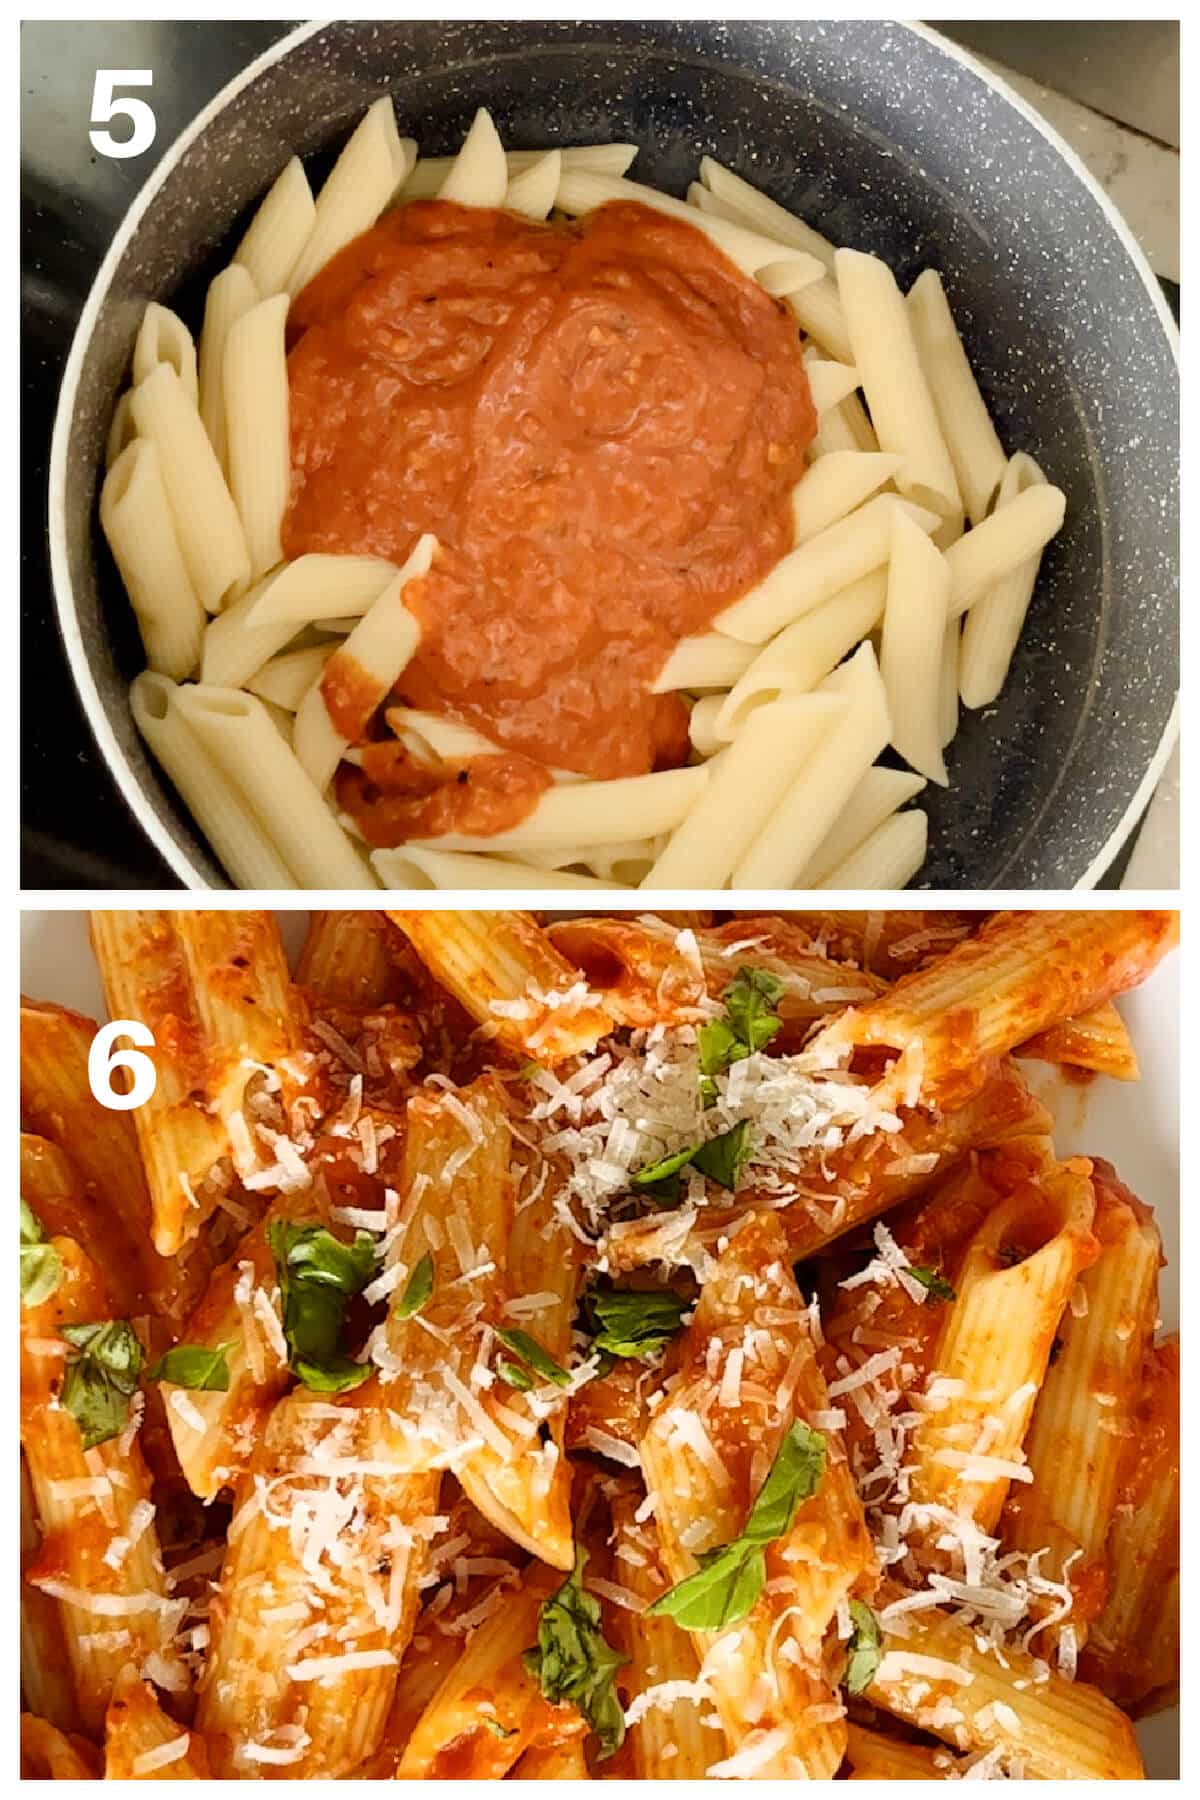 Collage of 2 photos to show how to assemble the pasta dish.